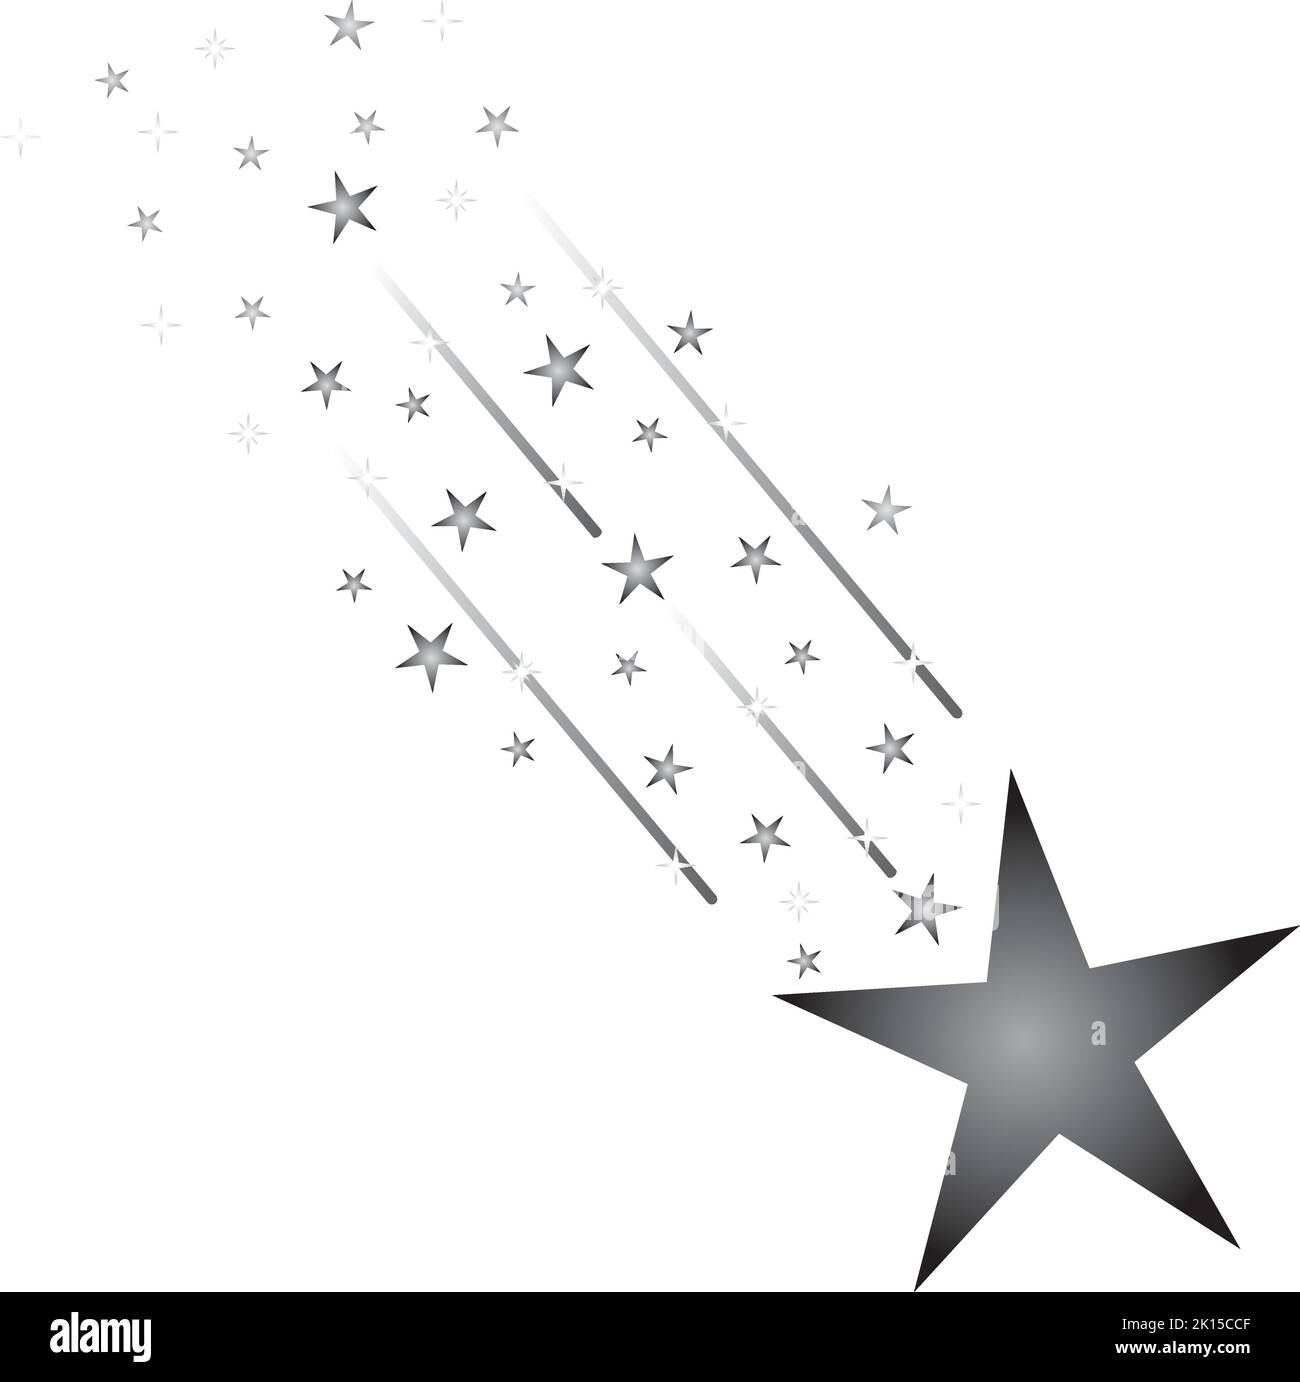 Black and White Creative Shooting Star Ethereal Graphic Stock Vector